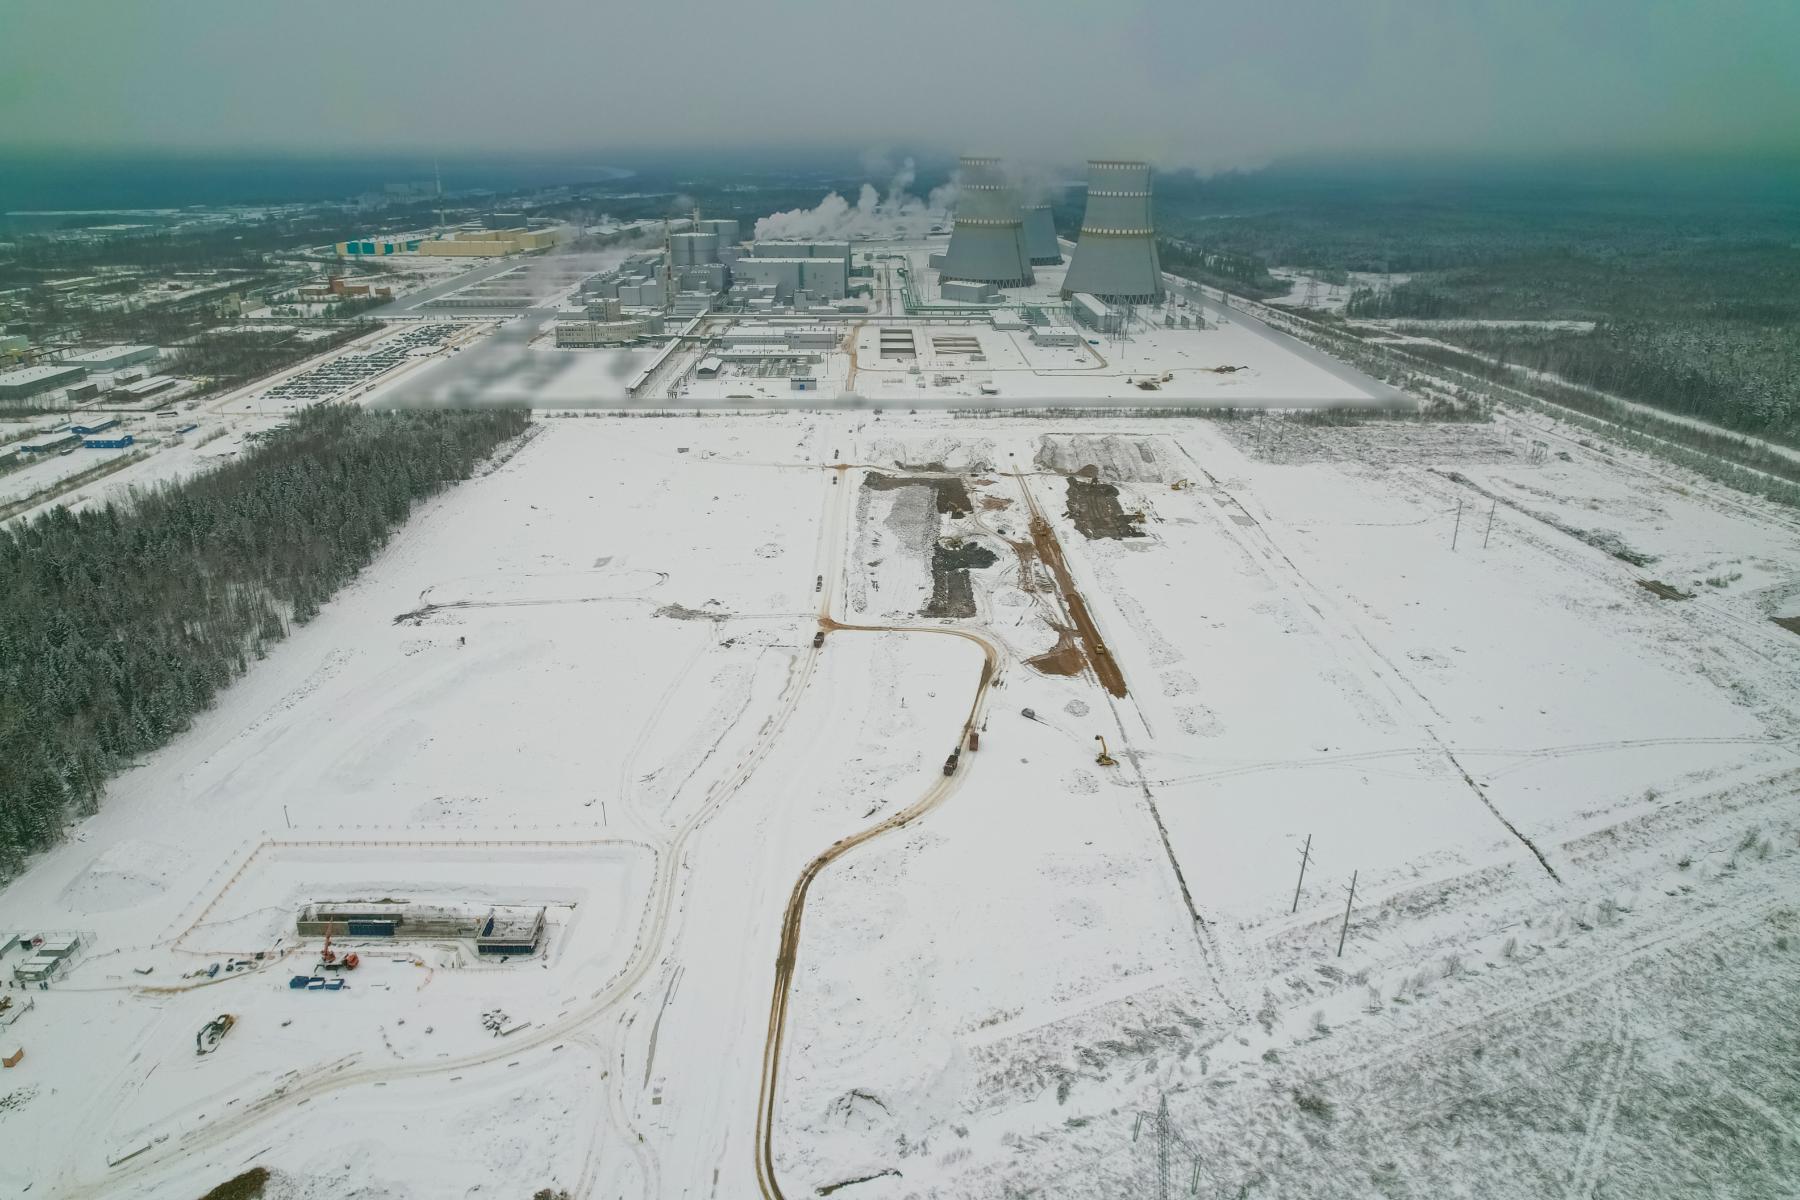 The site for the construction of new units has been completely cleared at the Leningrad NPP